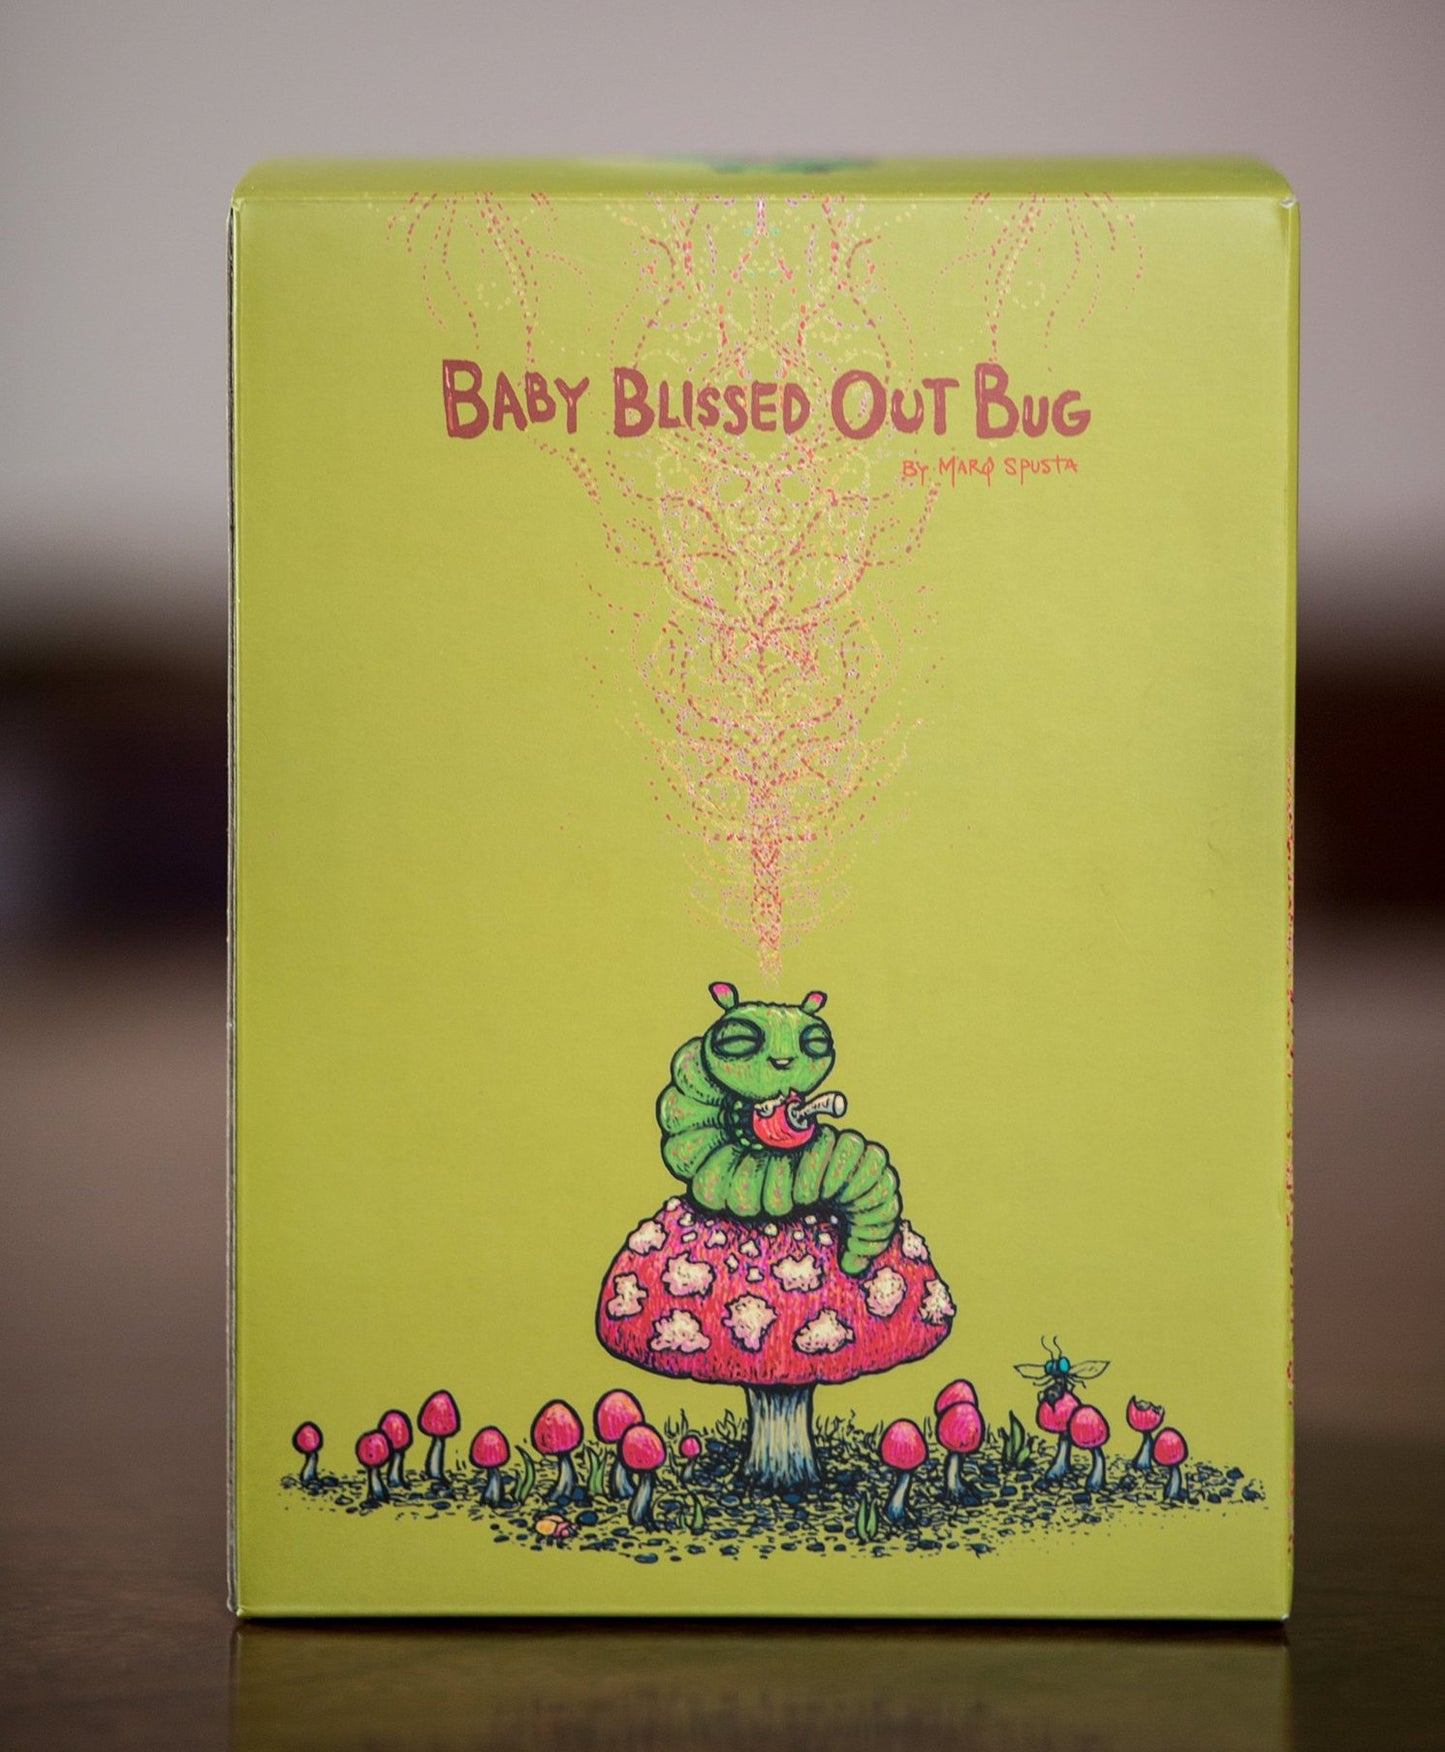 Marq Spusta "Baby Blissed Out Bug" Statue